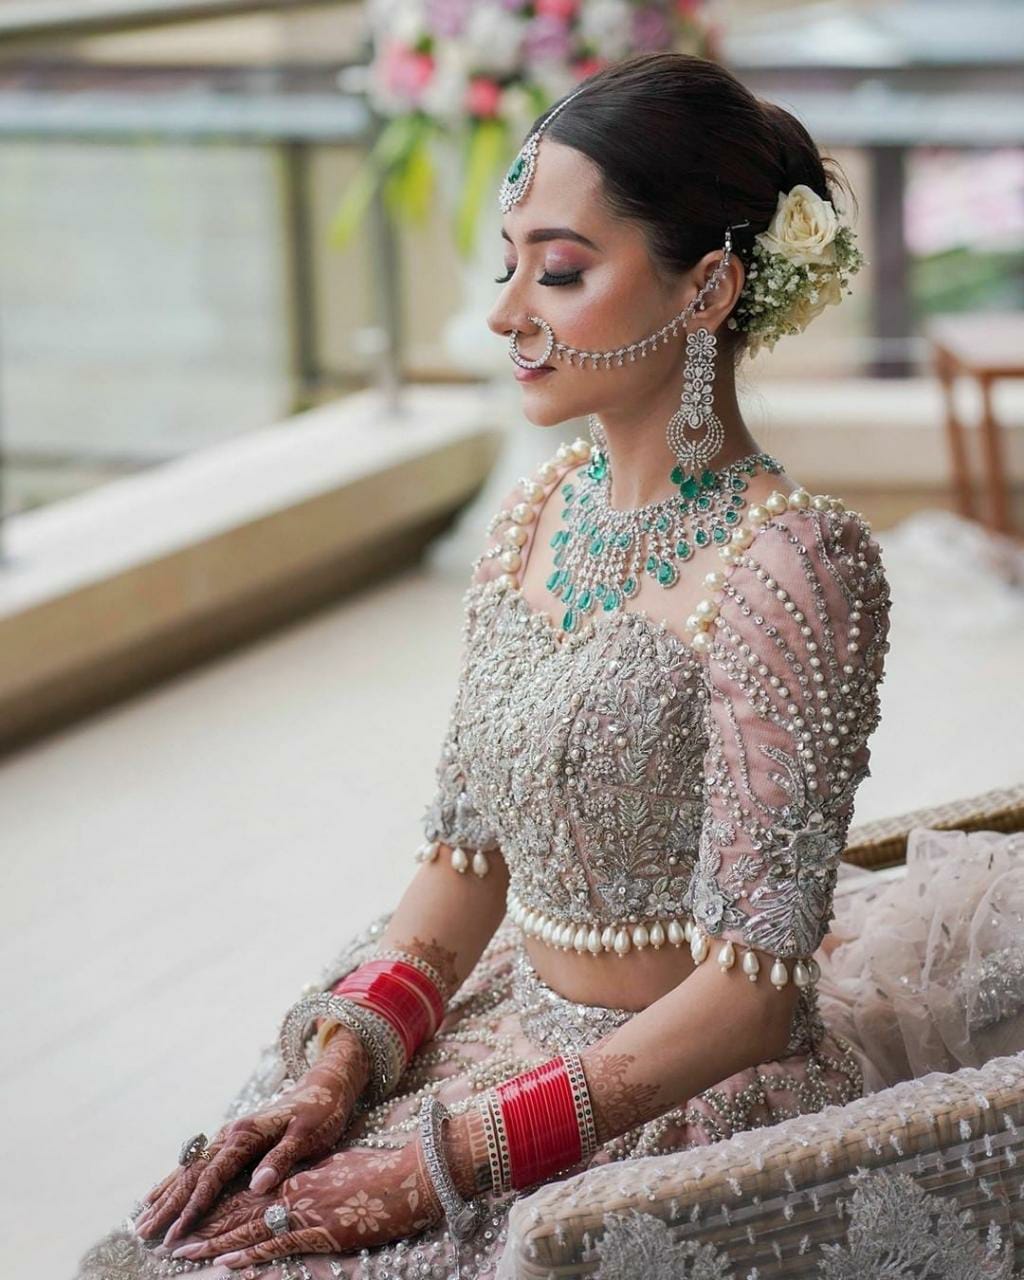 Trending: Puffy Ponytail Hairstyles That Indian Brides Are Getting Obsessed  With! | Stylish ponytail, Ponytail hairstyles, Bridal hair inspiration